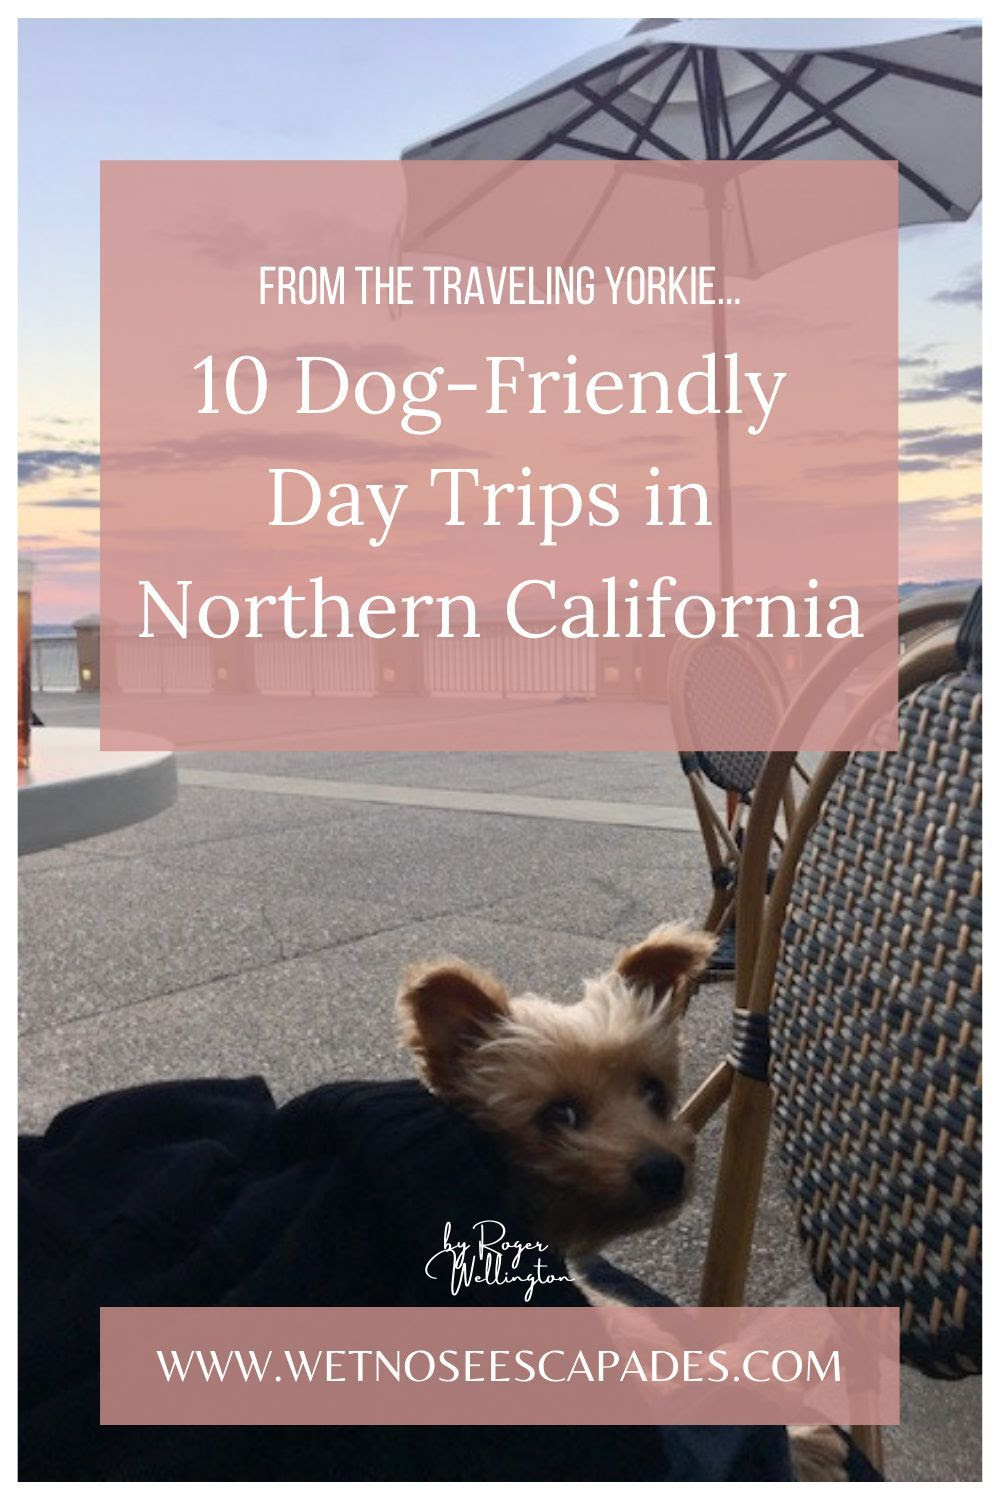 10 DogFriendly Day Trips in Northern California 2021 Wet Nose